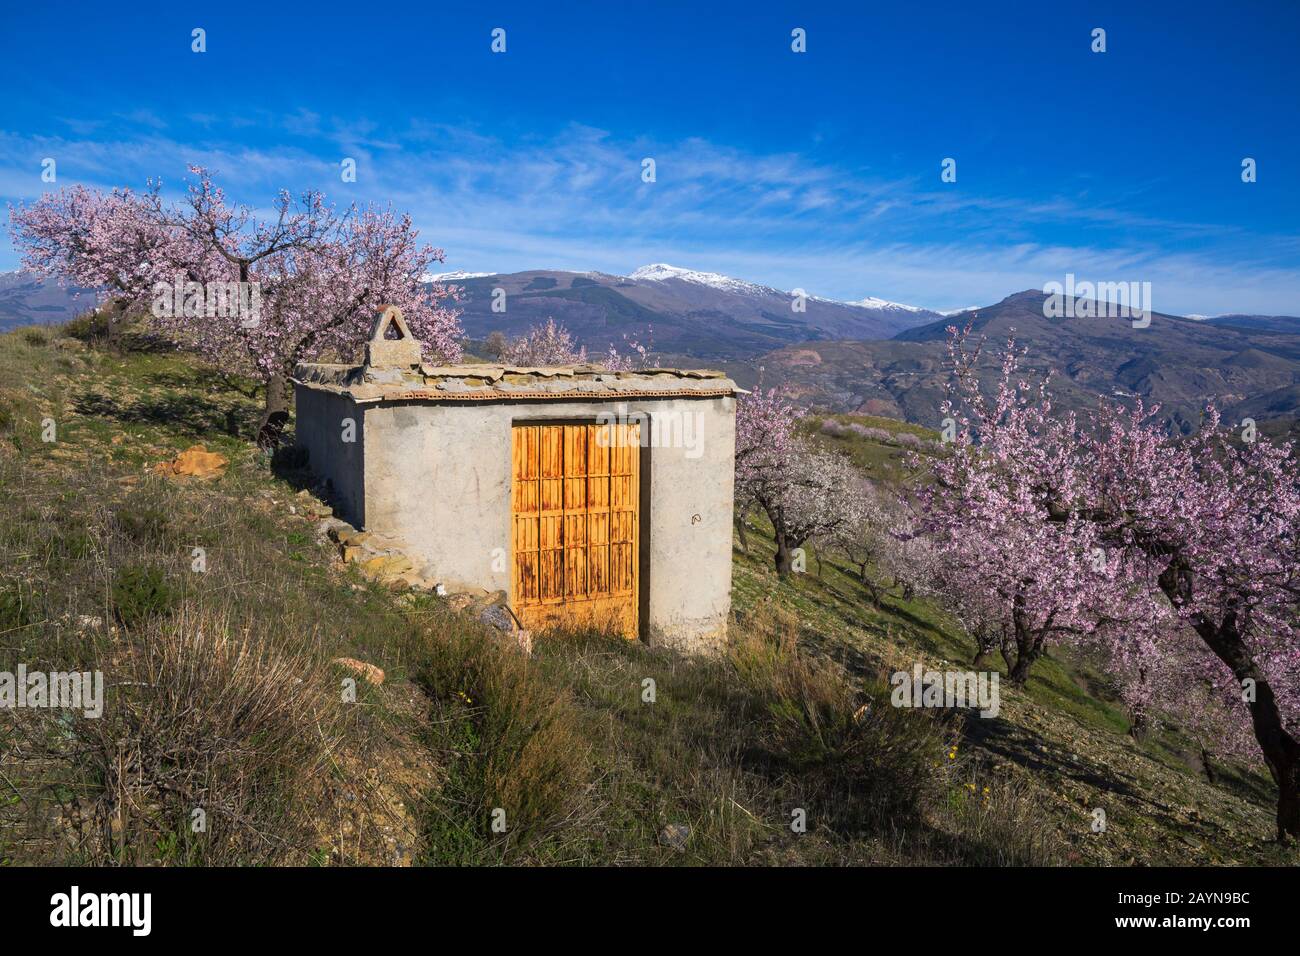 Flowering almond trees, almond blossom, almond trees blooming, Prunus dulcis, with Sierra Nevada mountains in the back at Andalucia, Spain in February Stock Photo